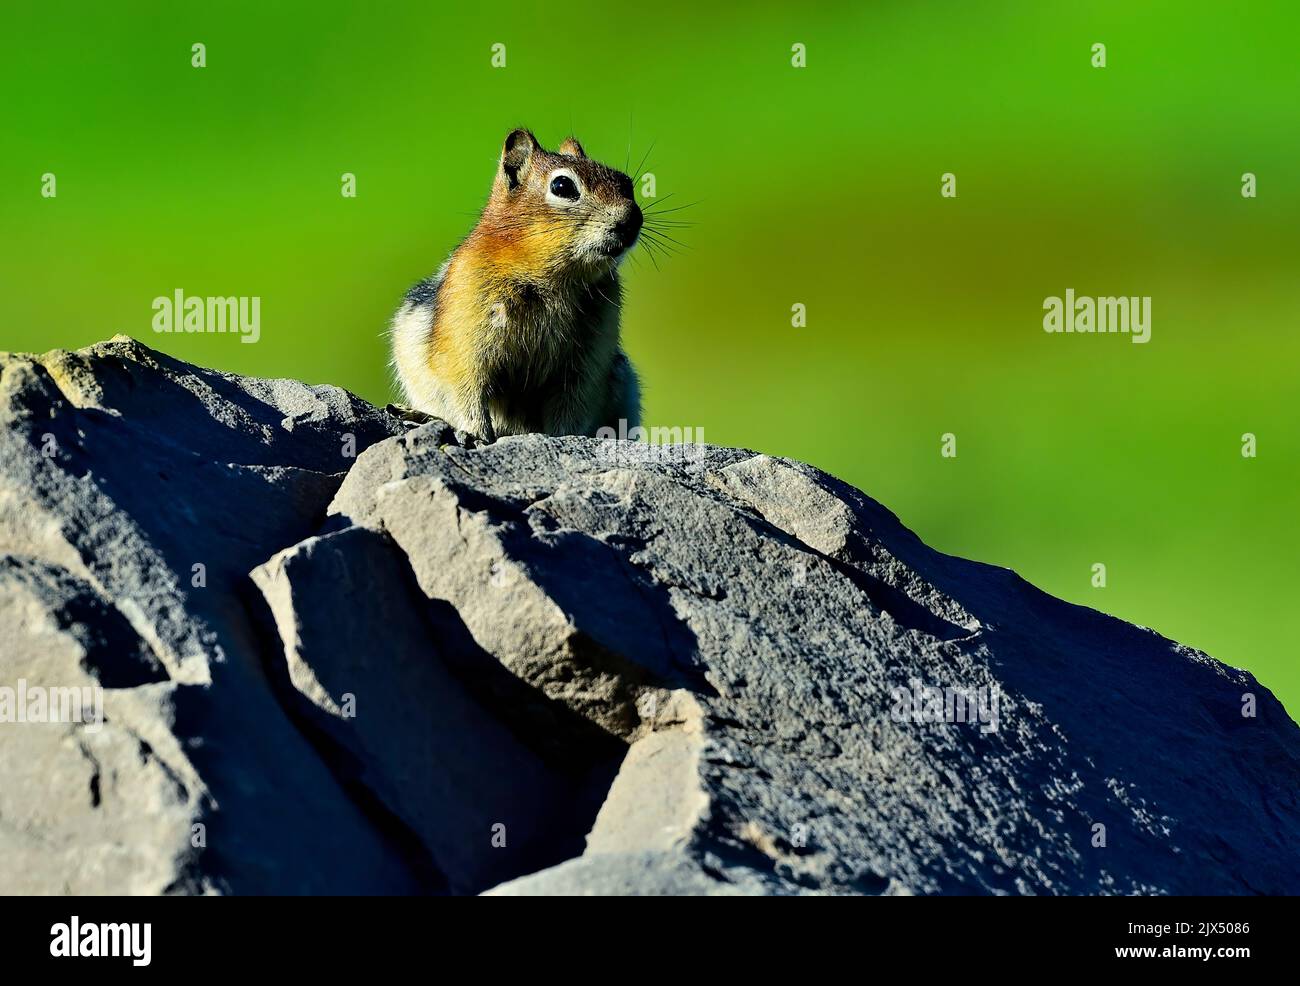 A Golden-mantled ground squirrel,  Callospermophilus lateralis; resting on a large rock for a better view of his surroundings. Stock Photo